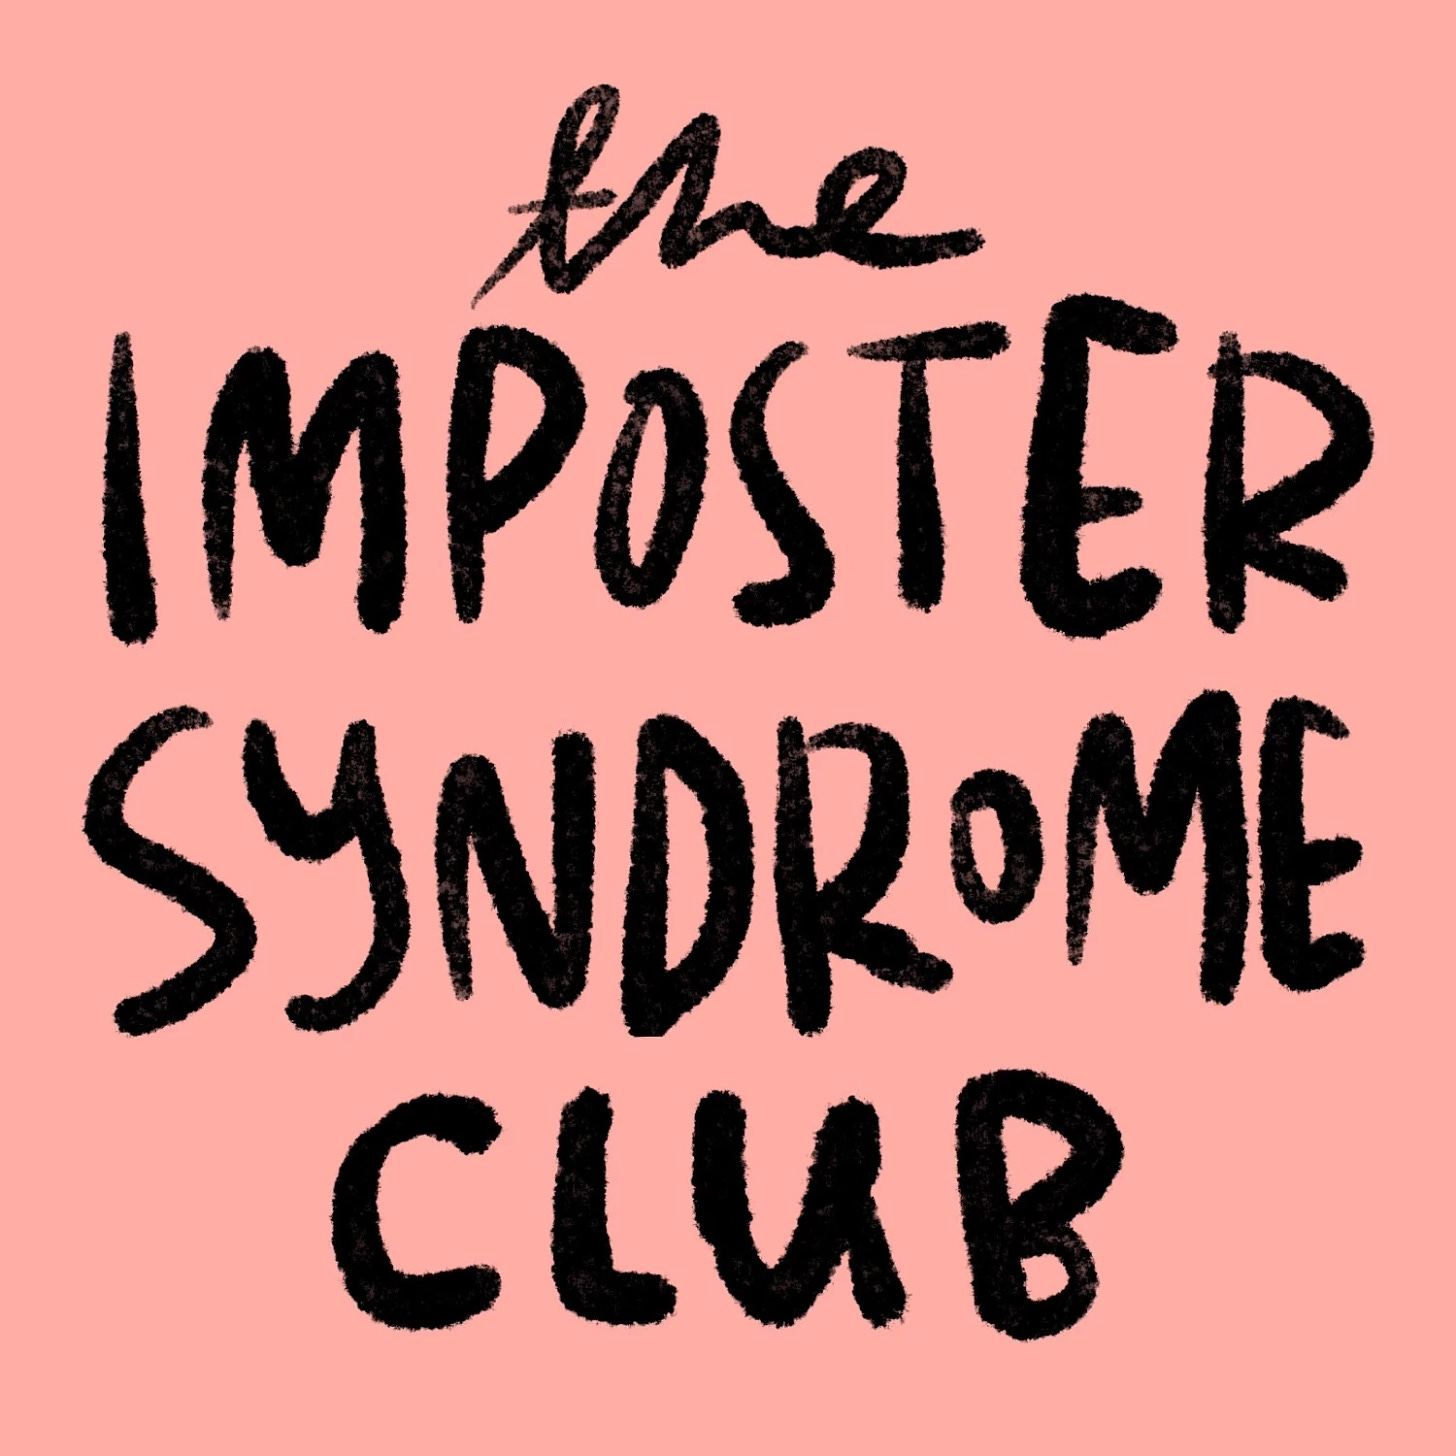 A graphic for 'The Imposter Syndrome Club' written in black font on a peach background